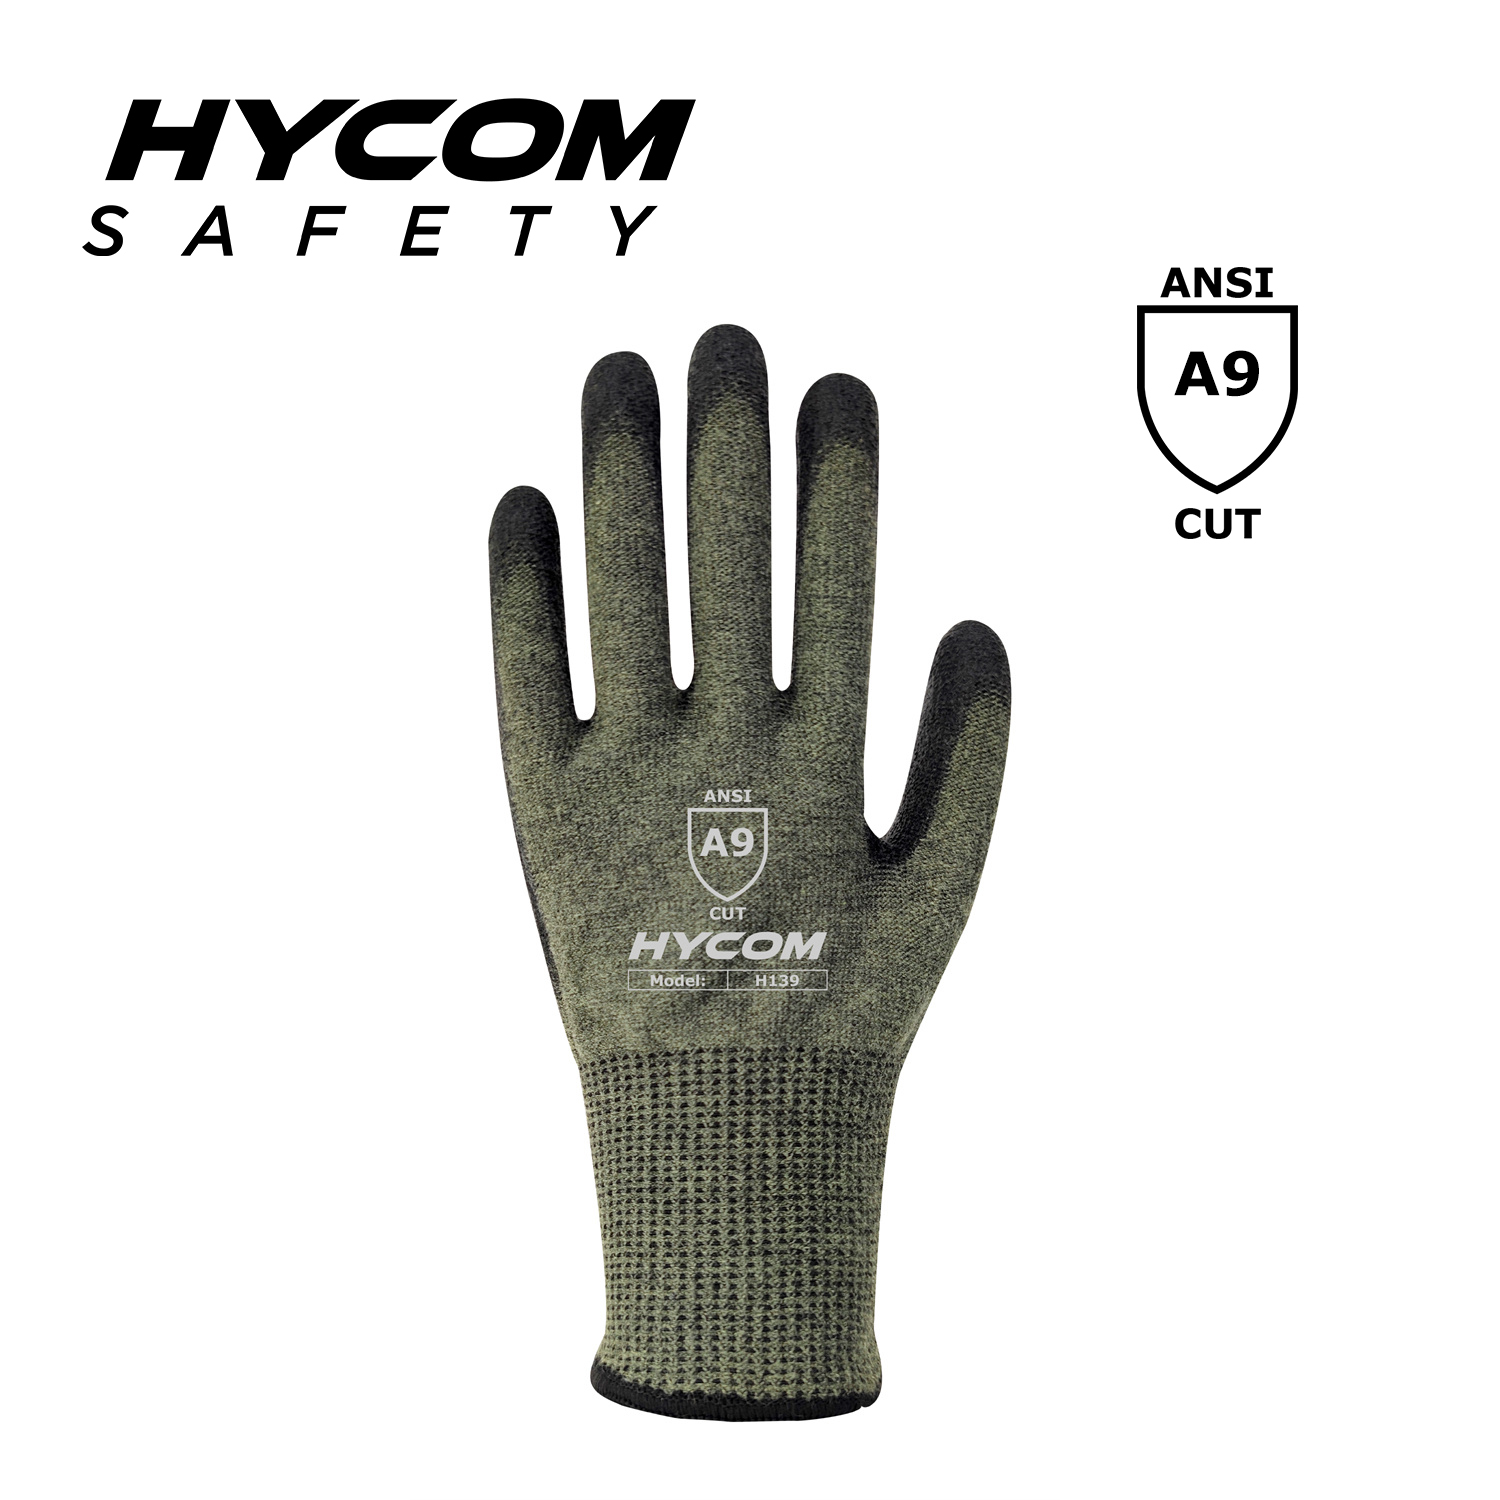 HYCOM 13G ANSI 9 Cut Resistant Glove Coated with Palm PU Aramid PPE Gloves